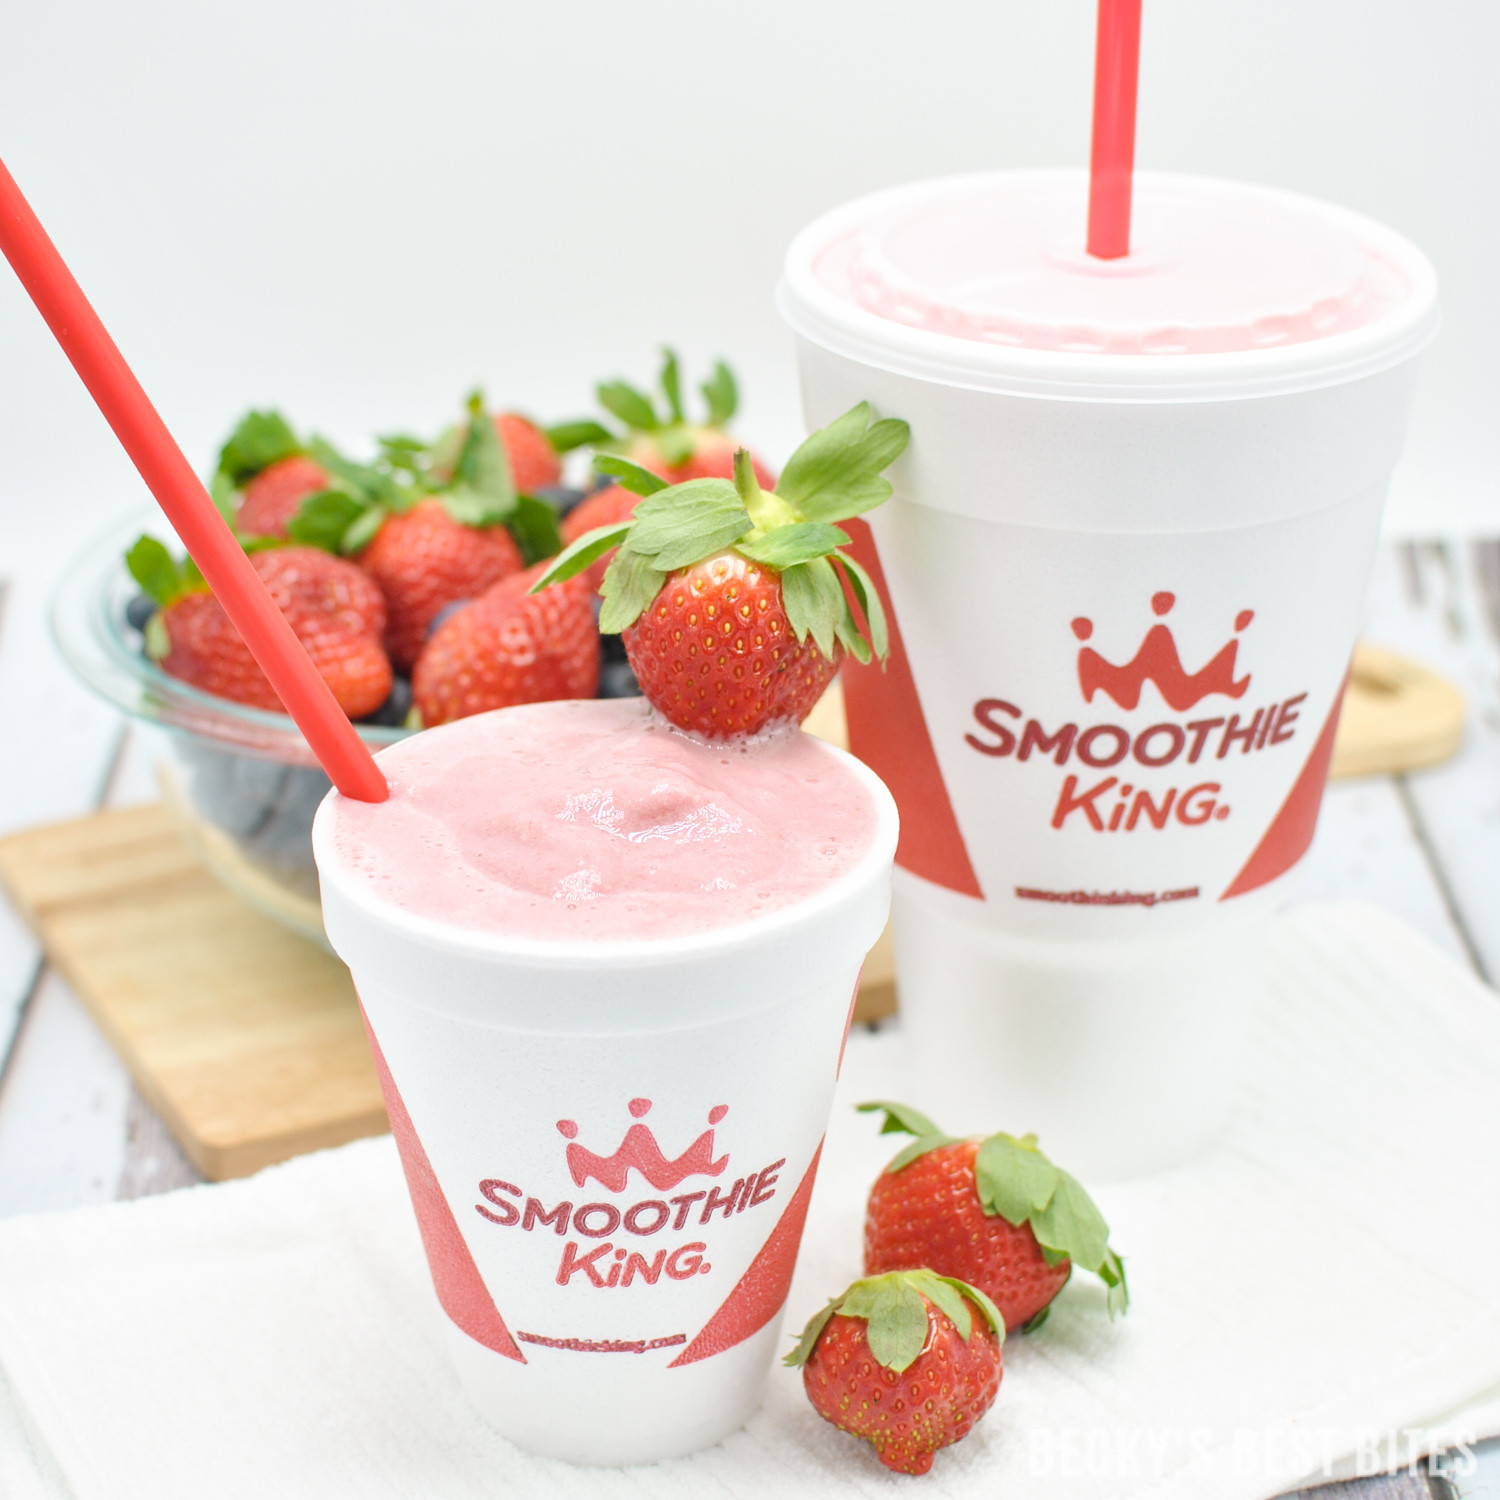 Healthy Smoothies At Smoothie King
 Change A Meal Challenge with Smoothie King